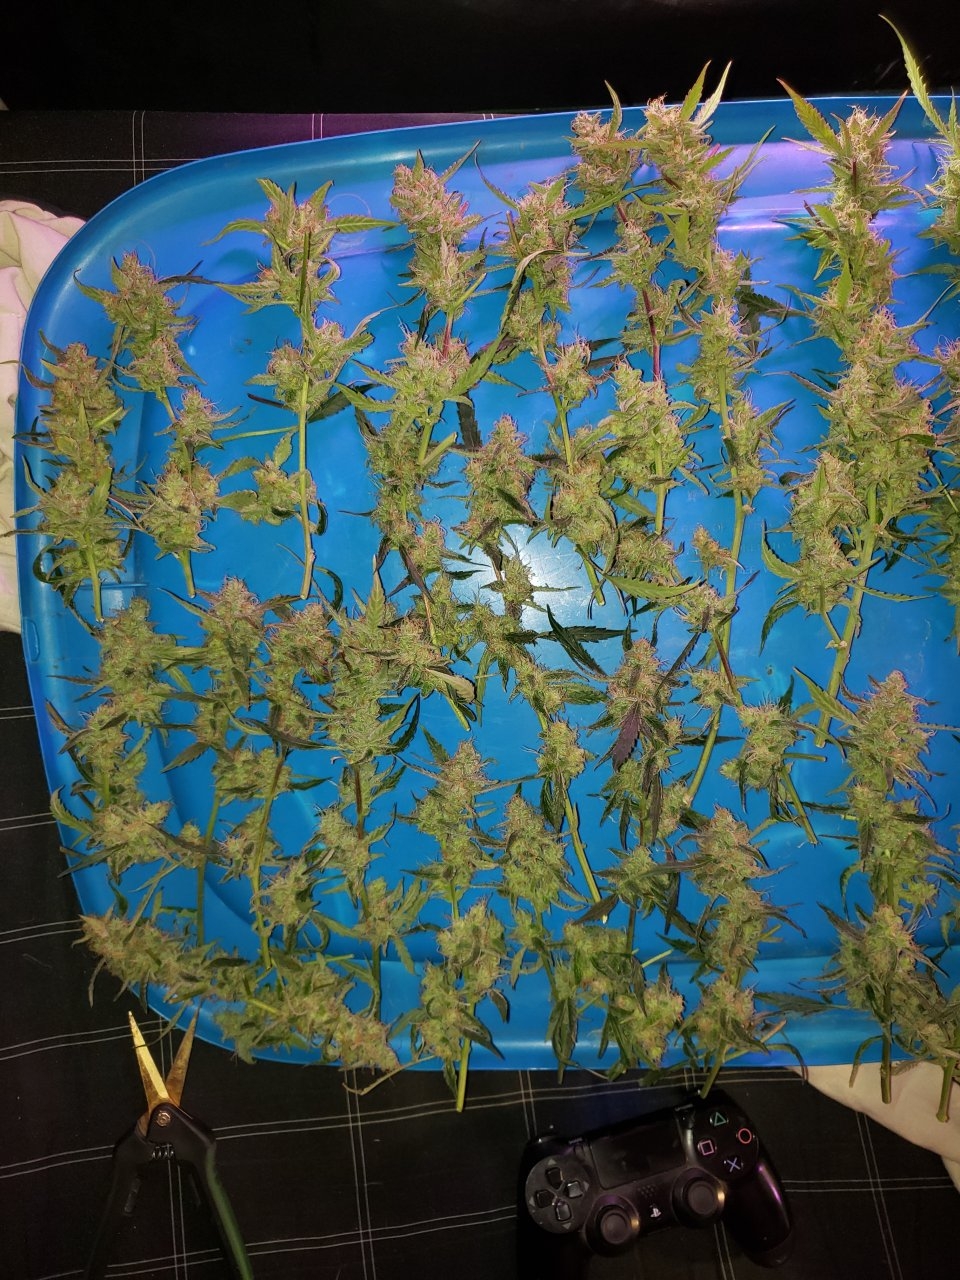 Tray of Bluedream auto buds